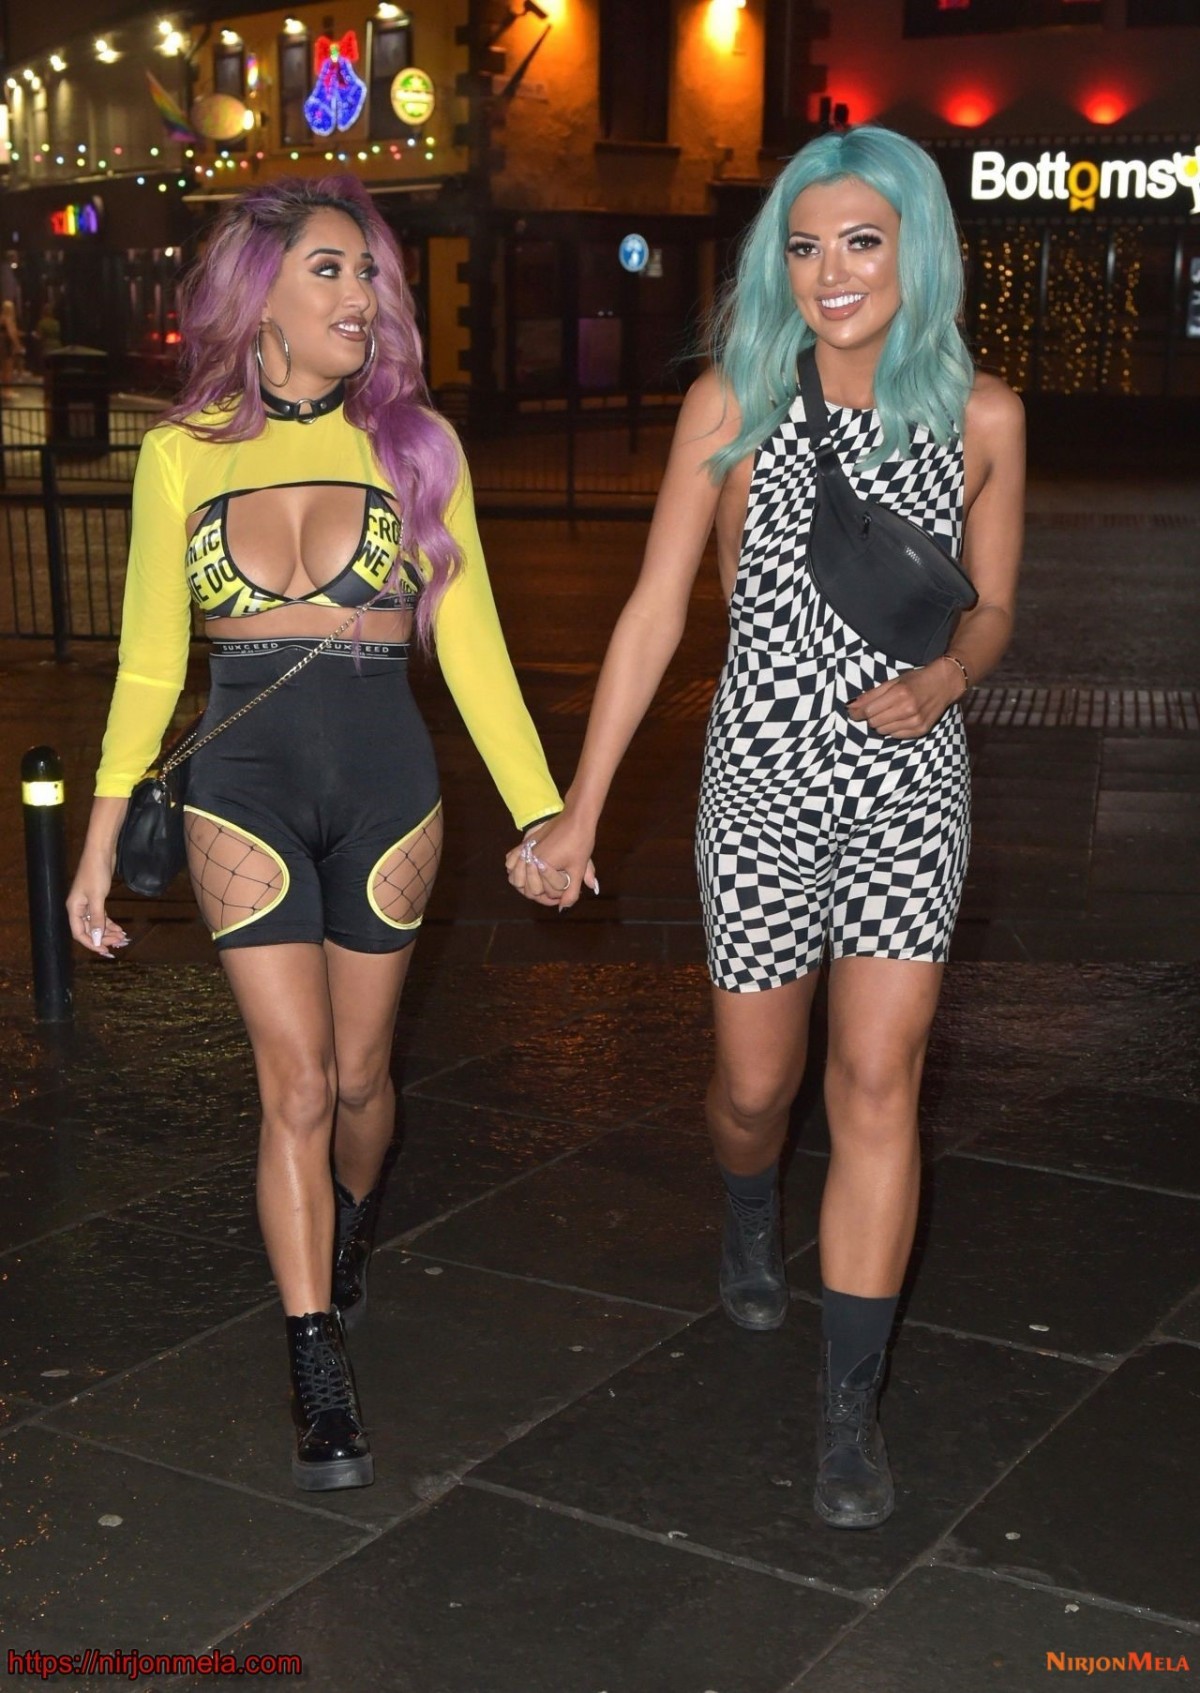 abbie-holborn-and-zahida-allen-night-out-in-newcastle-12-26-2018-0.jpg